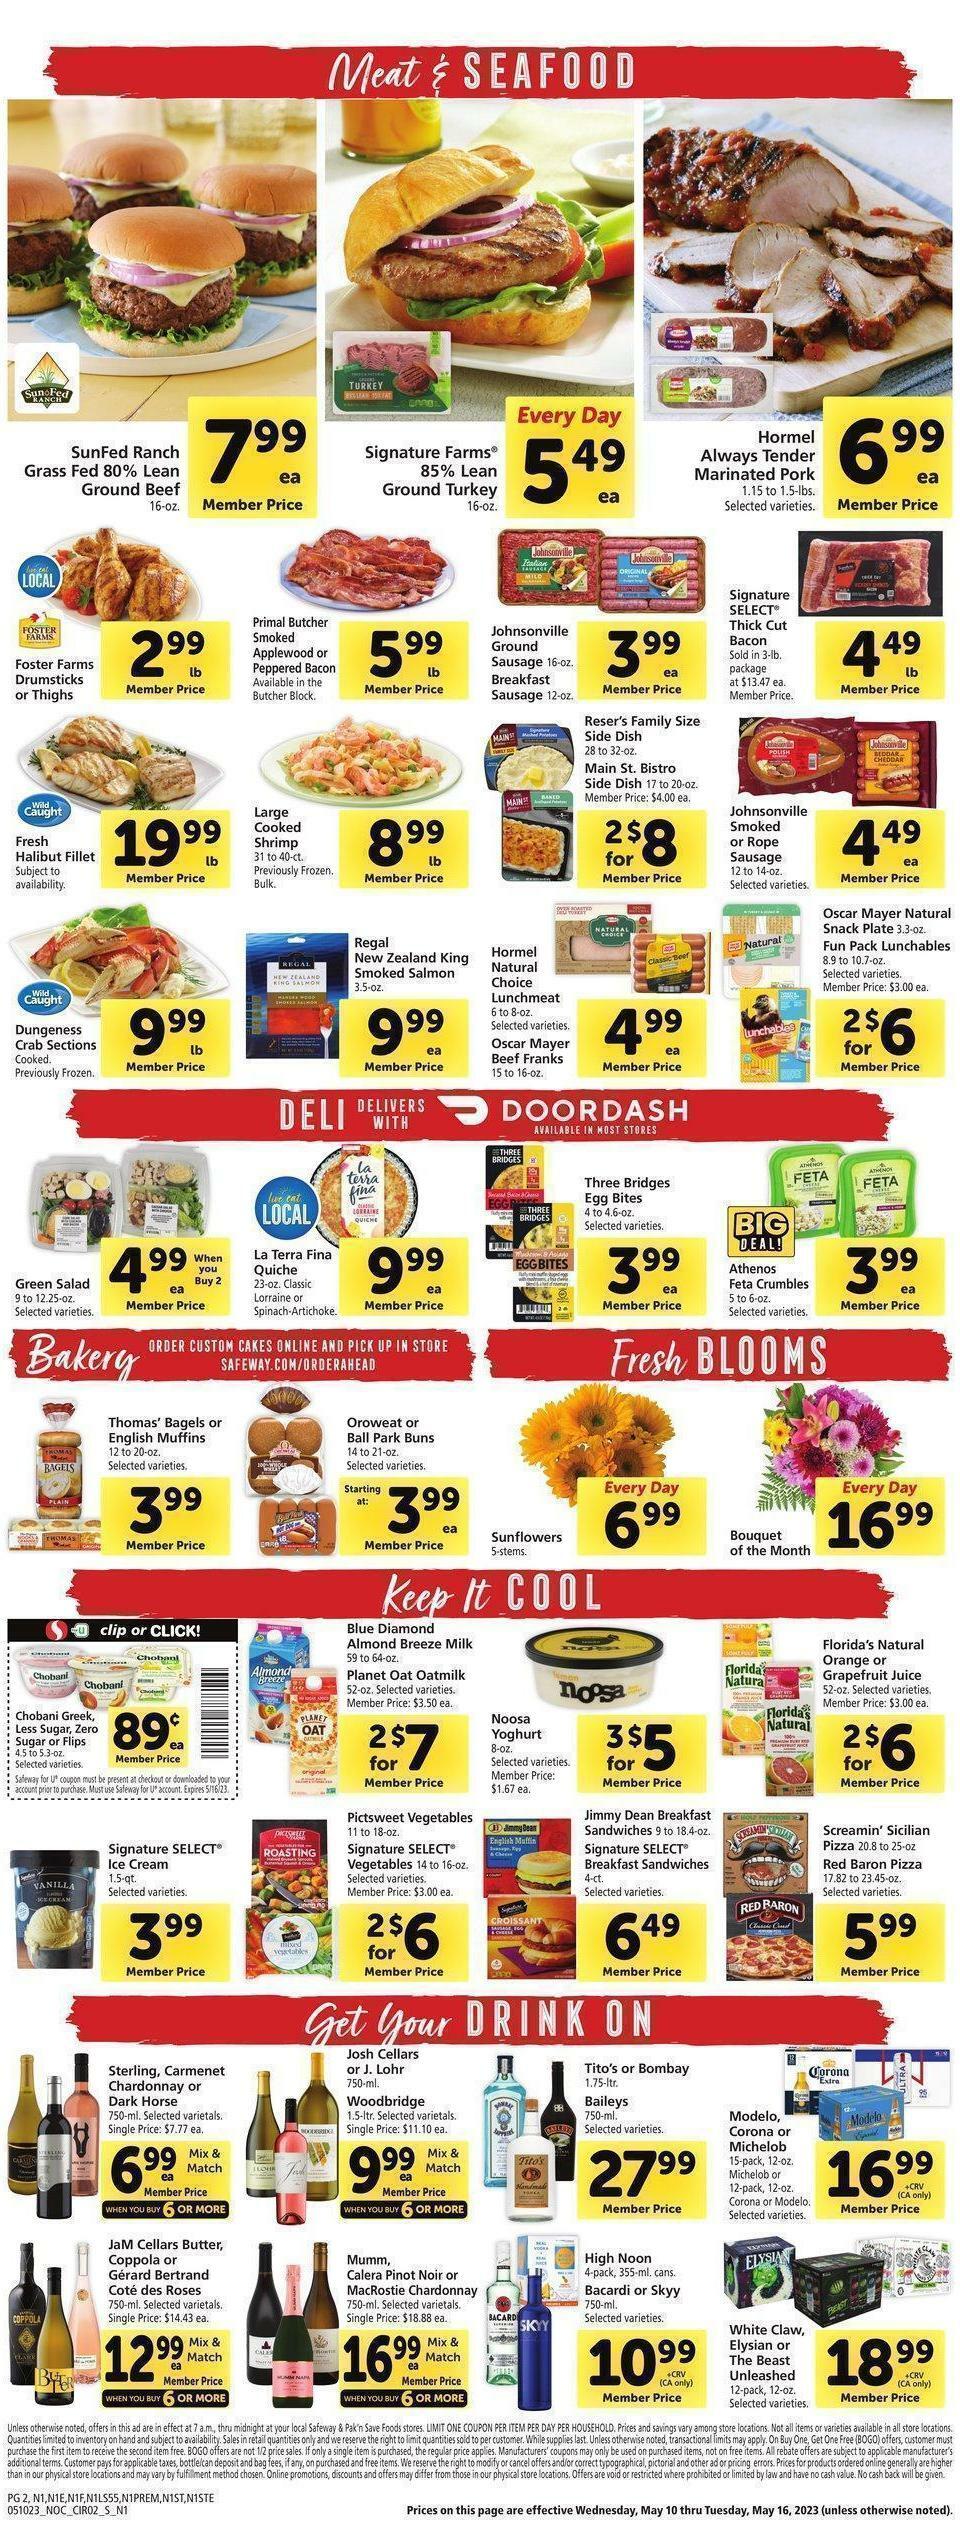 Safeway Weekly Ad from May 10